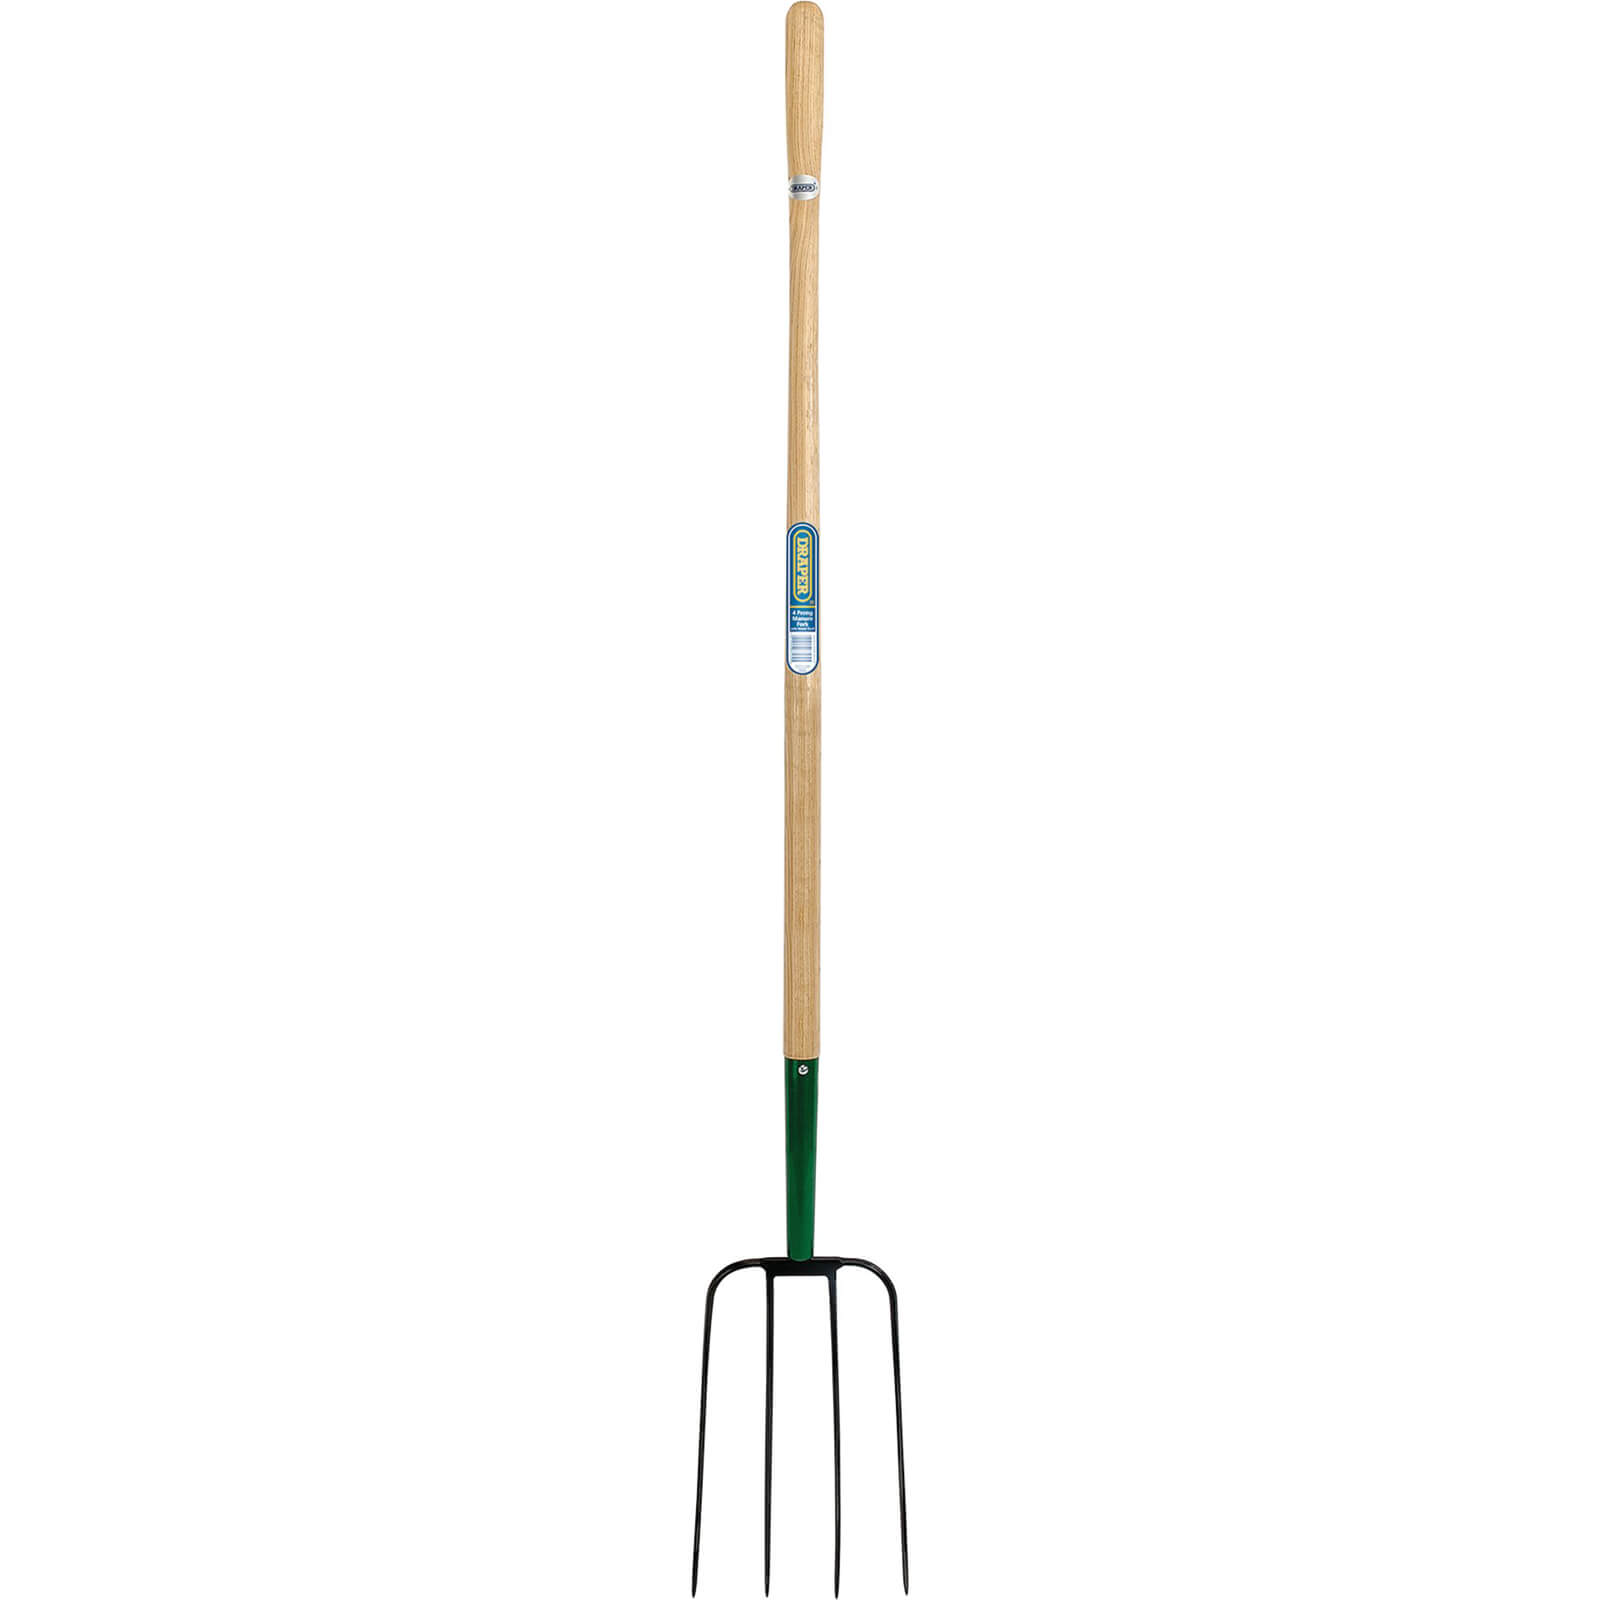 Image of Draper 4 Prong Manure Fork with Steel Shaft